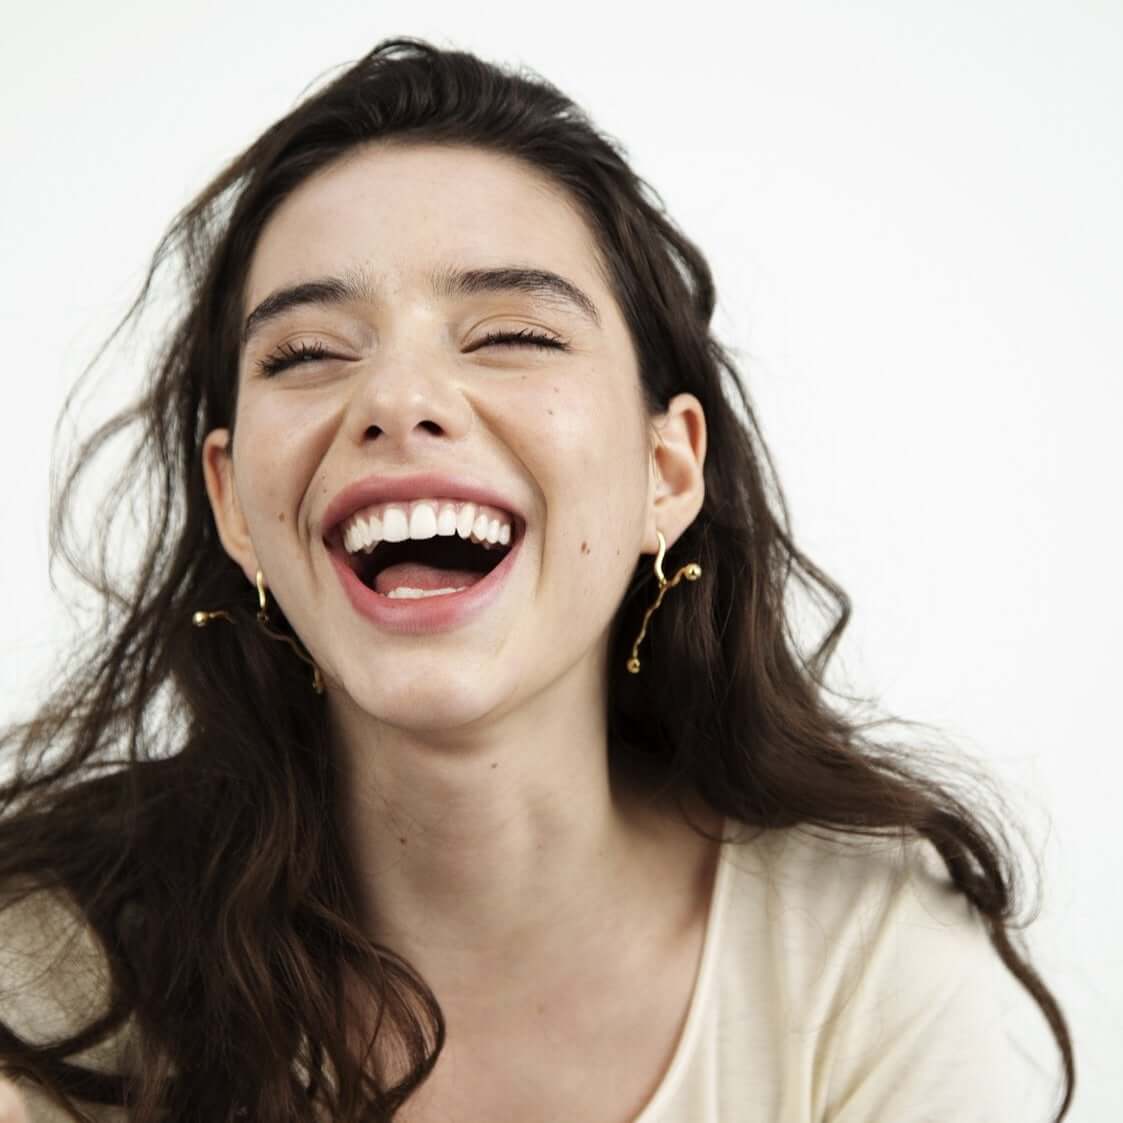 Laughing woman with dark hair and earrings